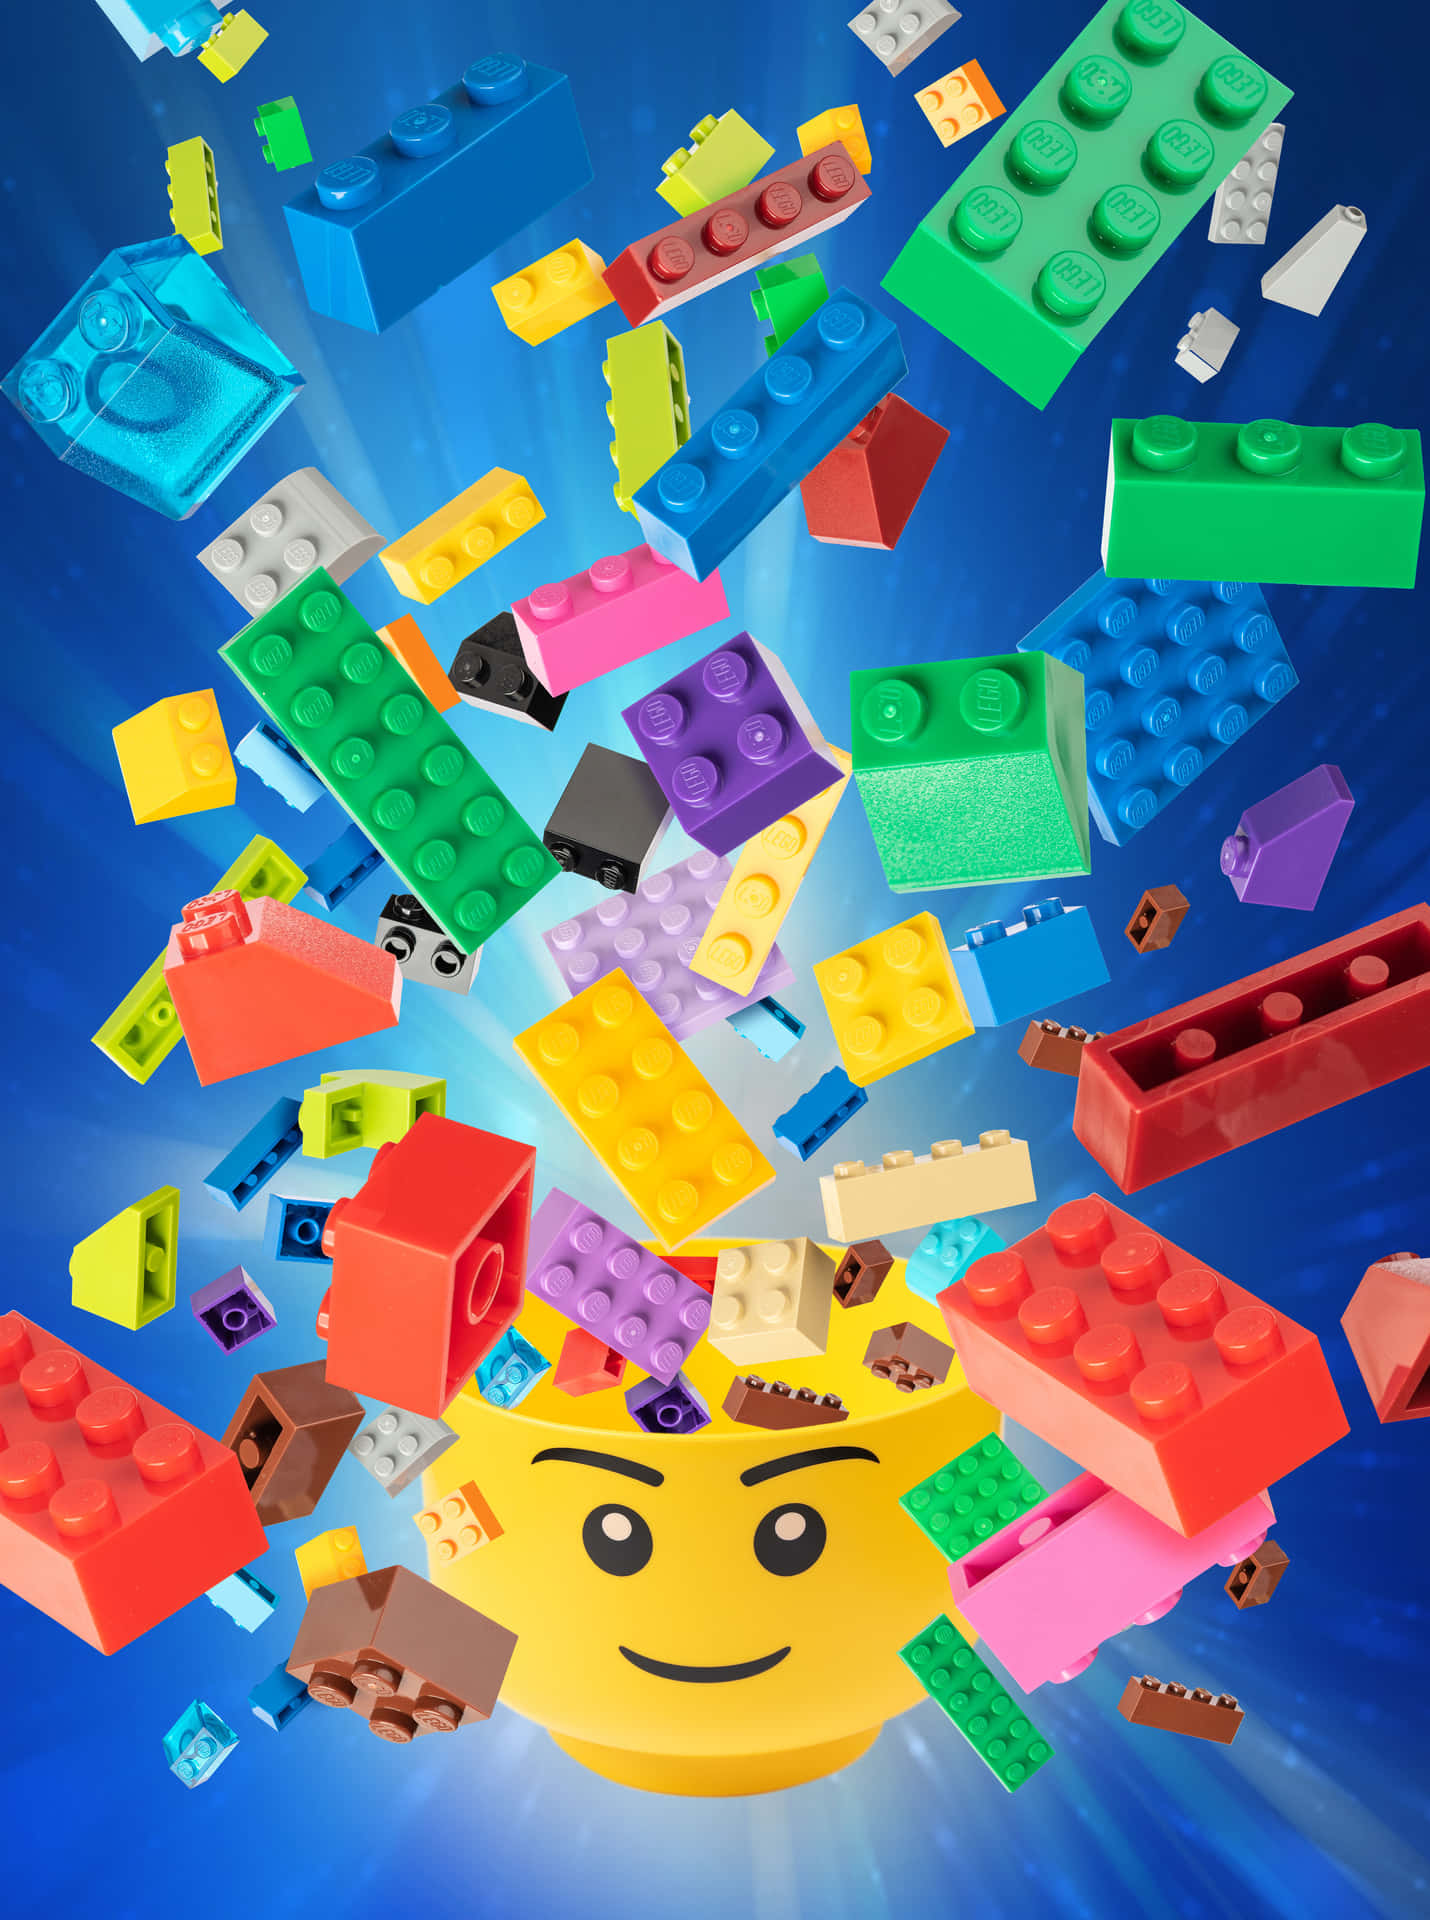 Lego Bricks - A Lego Game With A Colorful Face